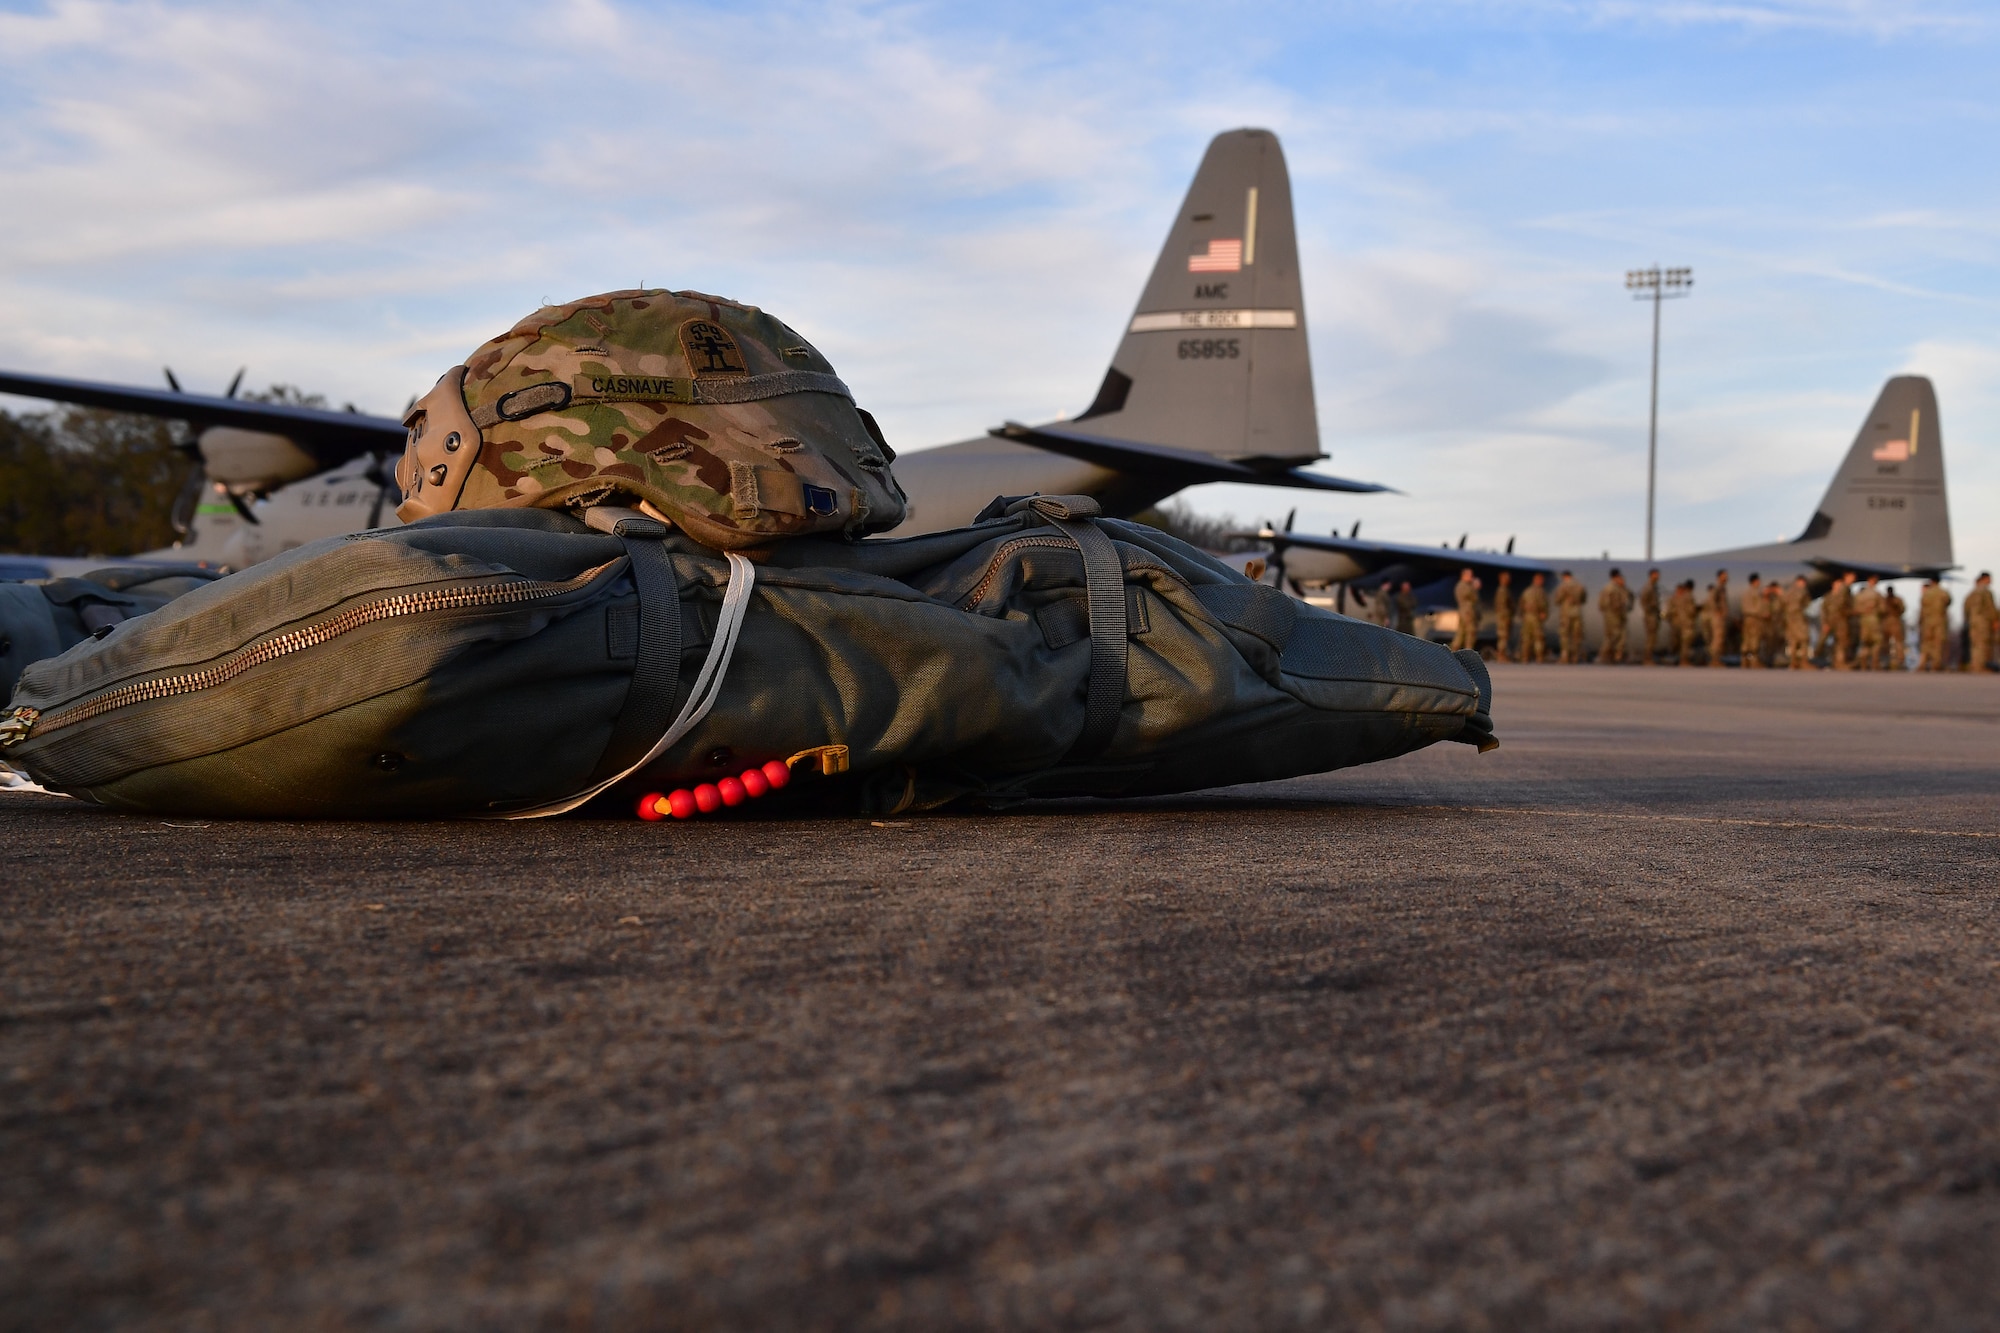 Soldiers from the 4th Brigade Combat Team (Airborne), 25th Infantry Division, at Joint Base Elmendorf-Richardson, Alaska, prepare their gear prior to boarding a C-130J Super Hercules during the joint forcible entry and airborne assault which kicked off Green Flag Little Rock 20-03.